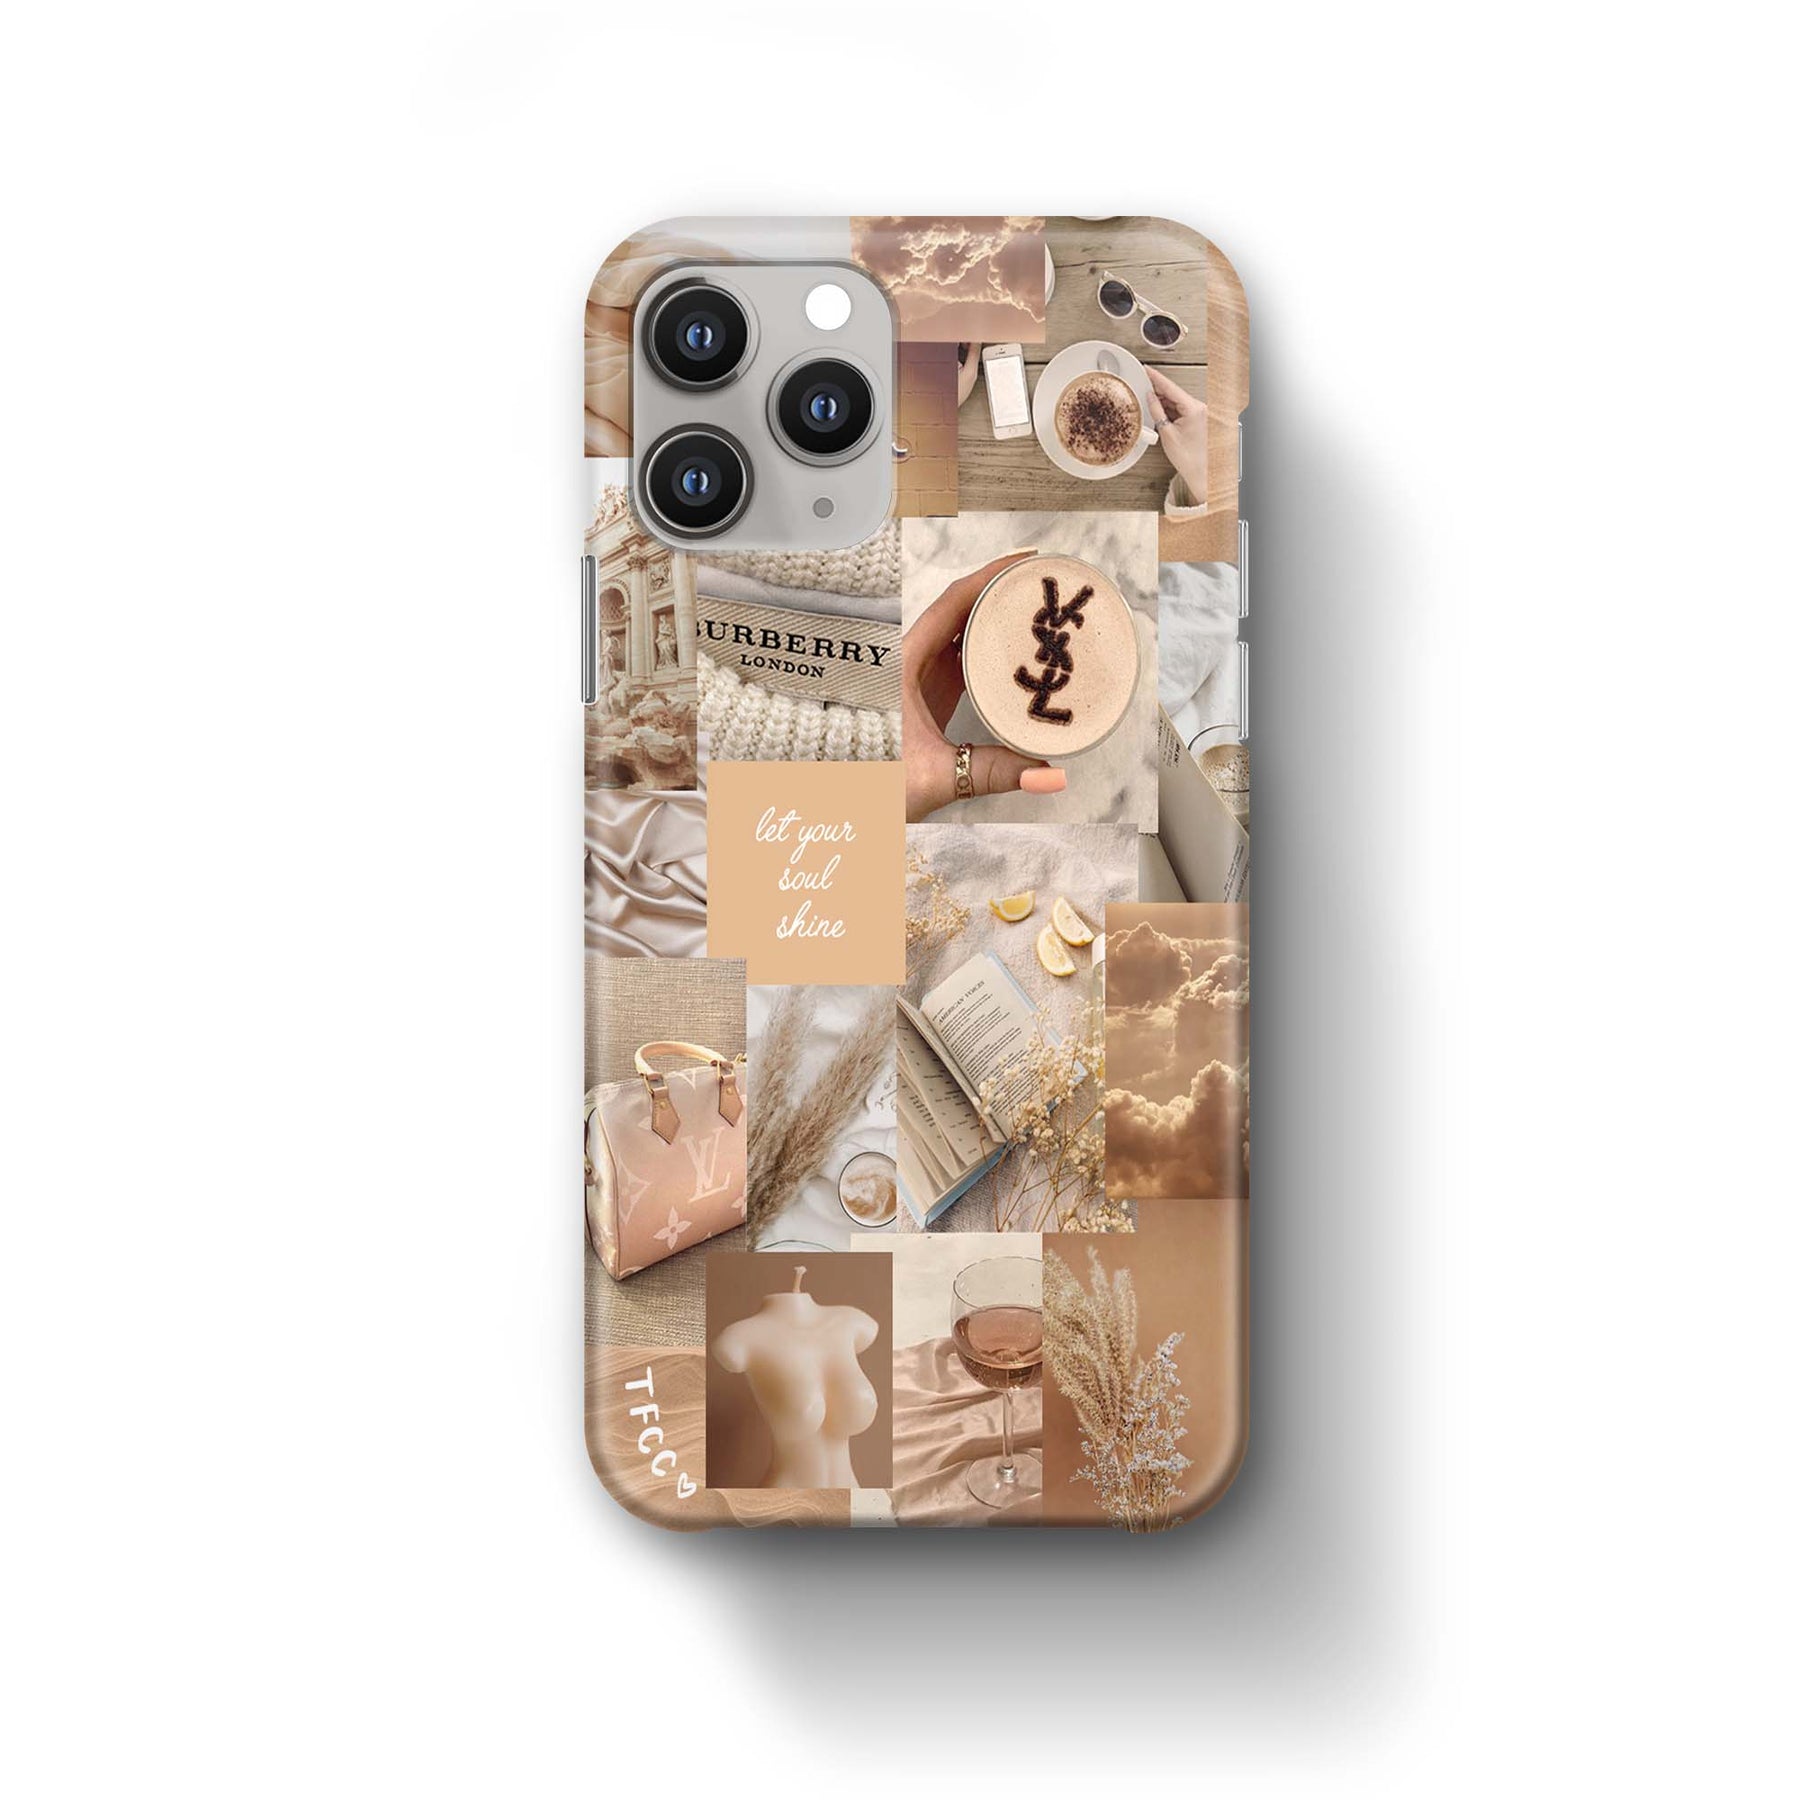 SOFT NUDES CASE - thefonecasecompany